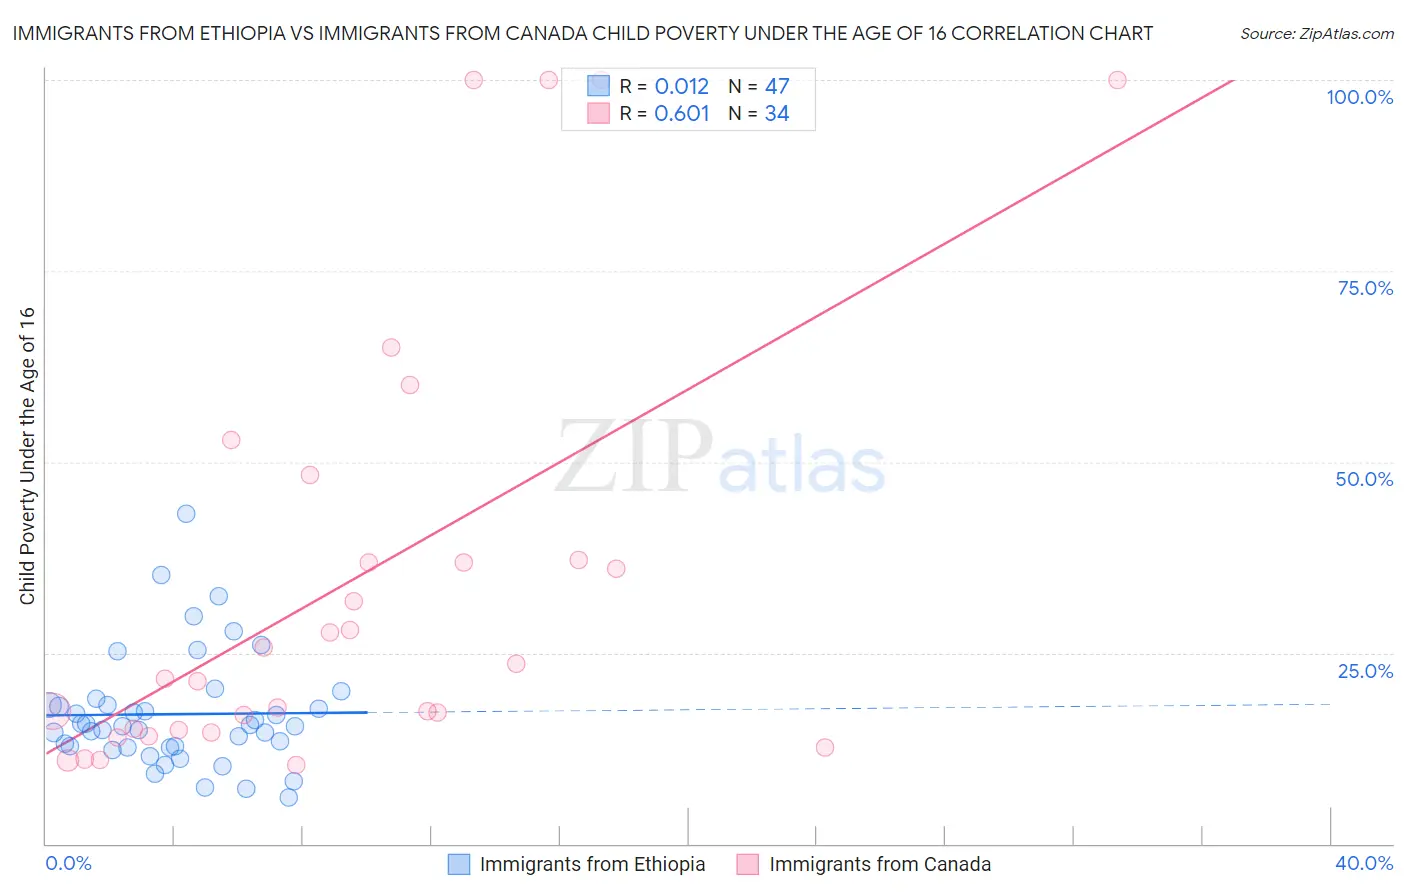 Immigrants from Ethiopia vs Immigrants from Canada Child Poverty Under the Age of 16